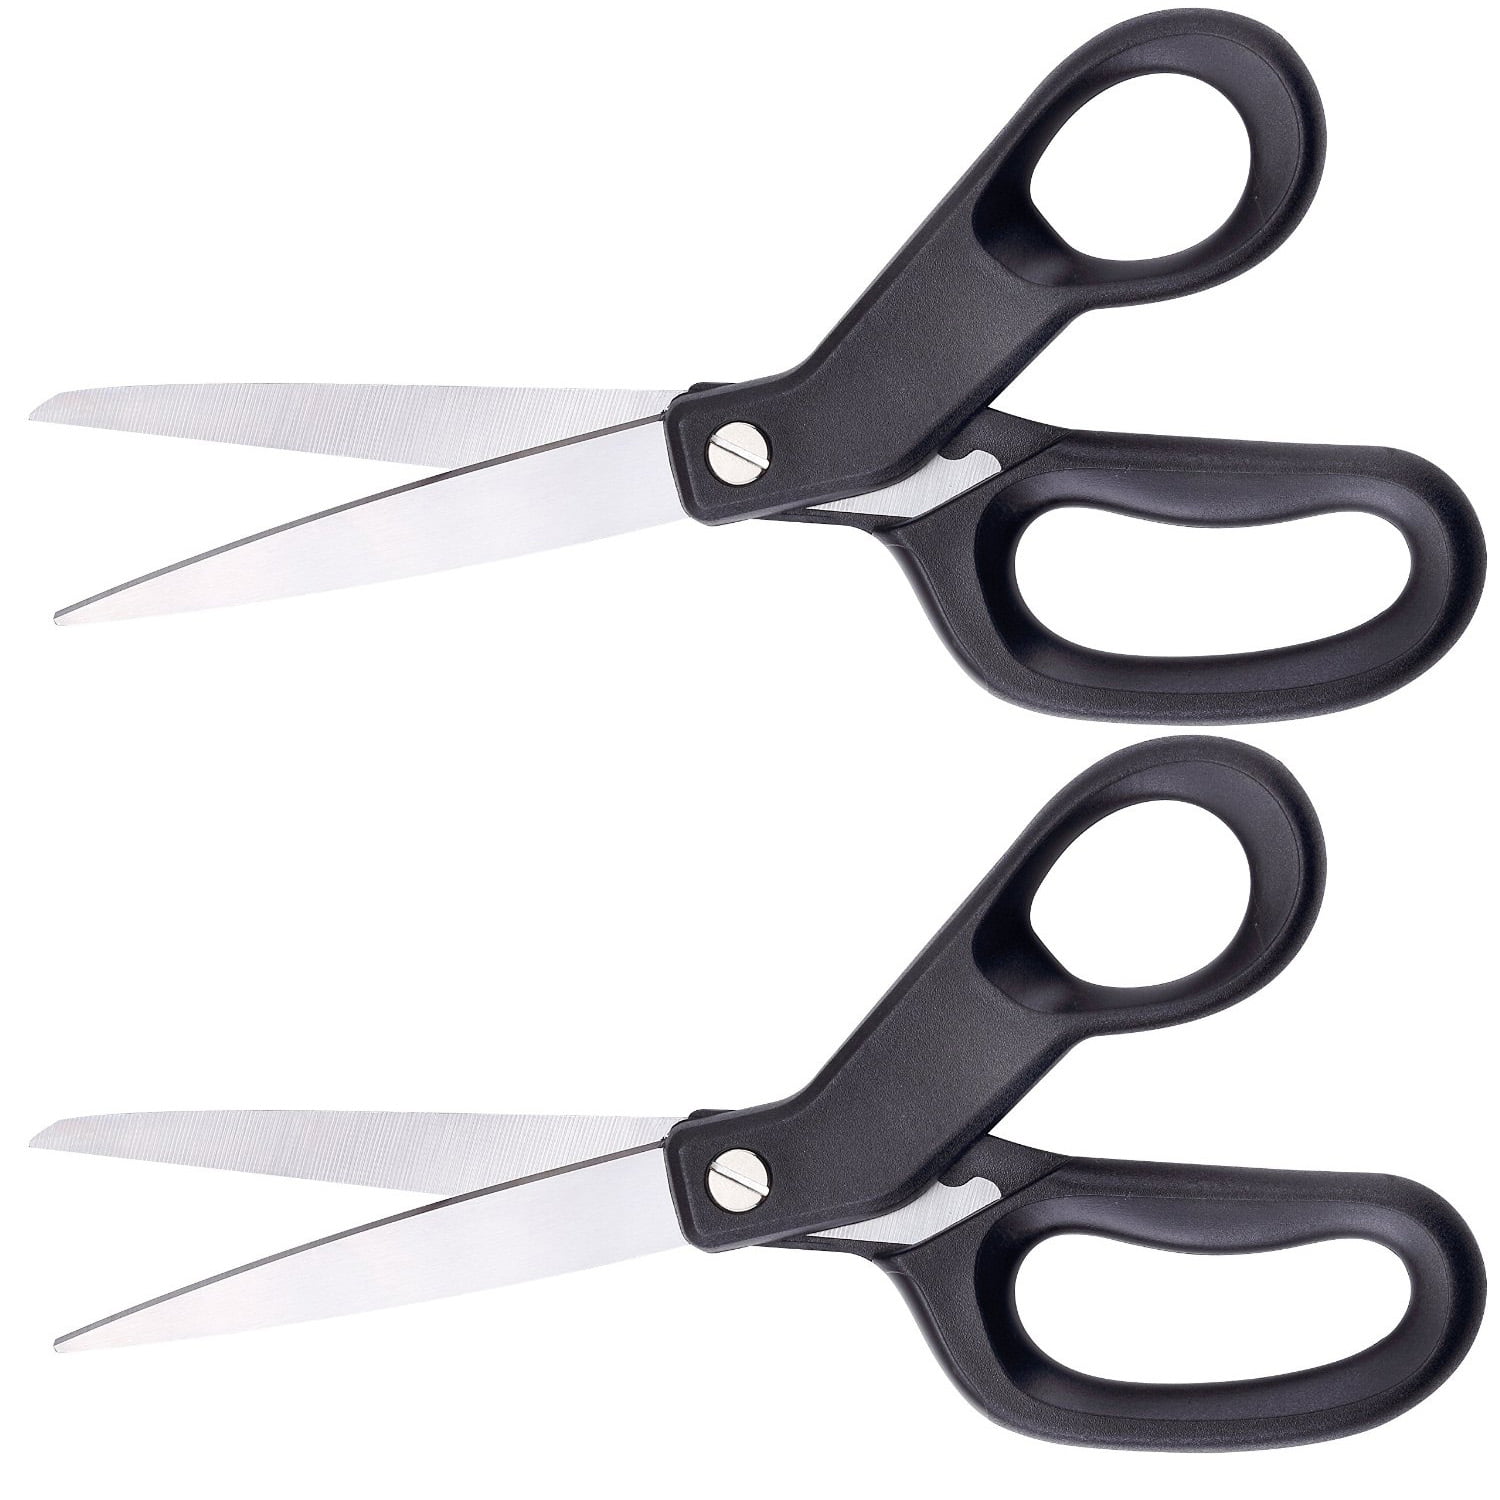 With Options 8 Inches Dexterity Aid Loop Scissors 2-Pack Dark Blue 